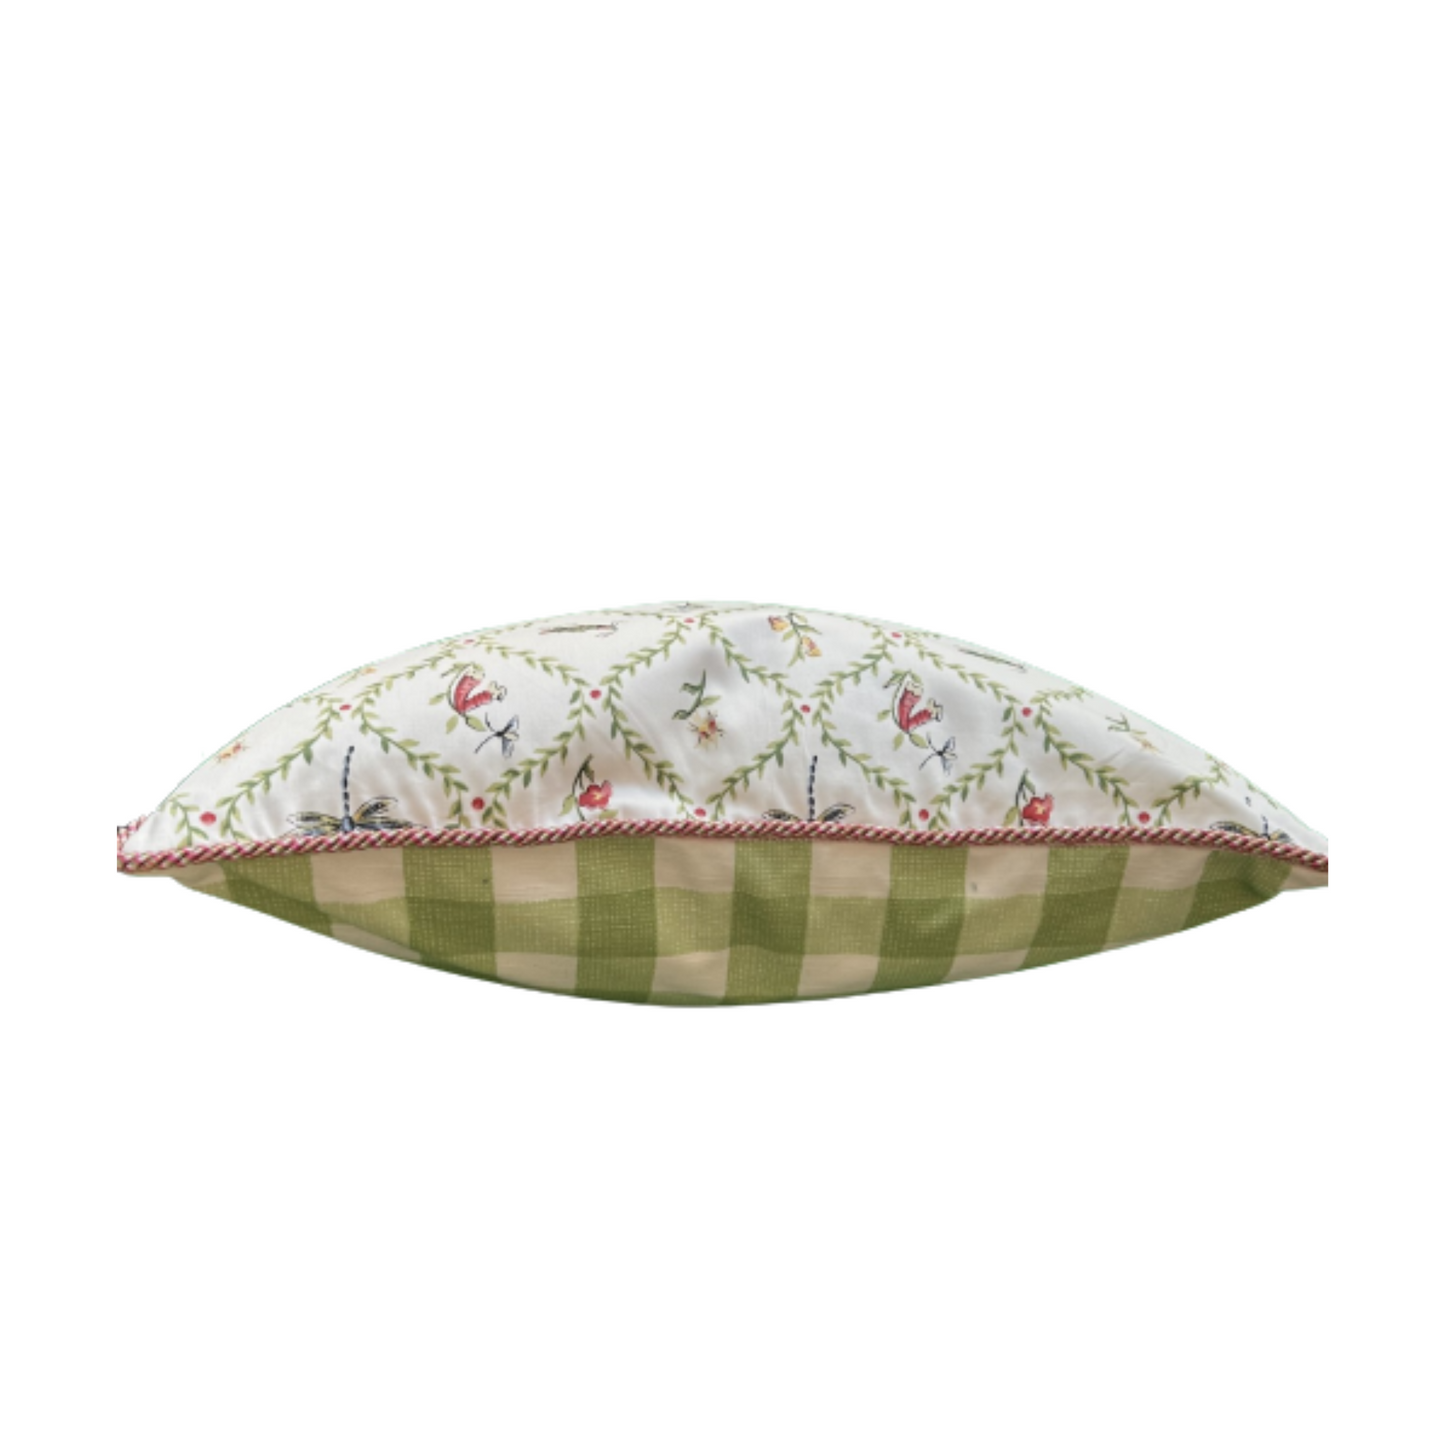 Charming Pink and Green Garden Bugs 24 x 24 Square Designer Pillow Front with Down Feather Insert